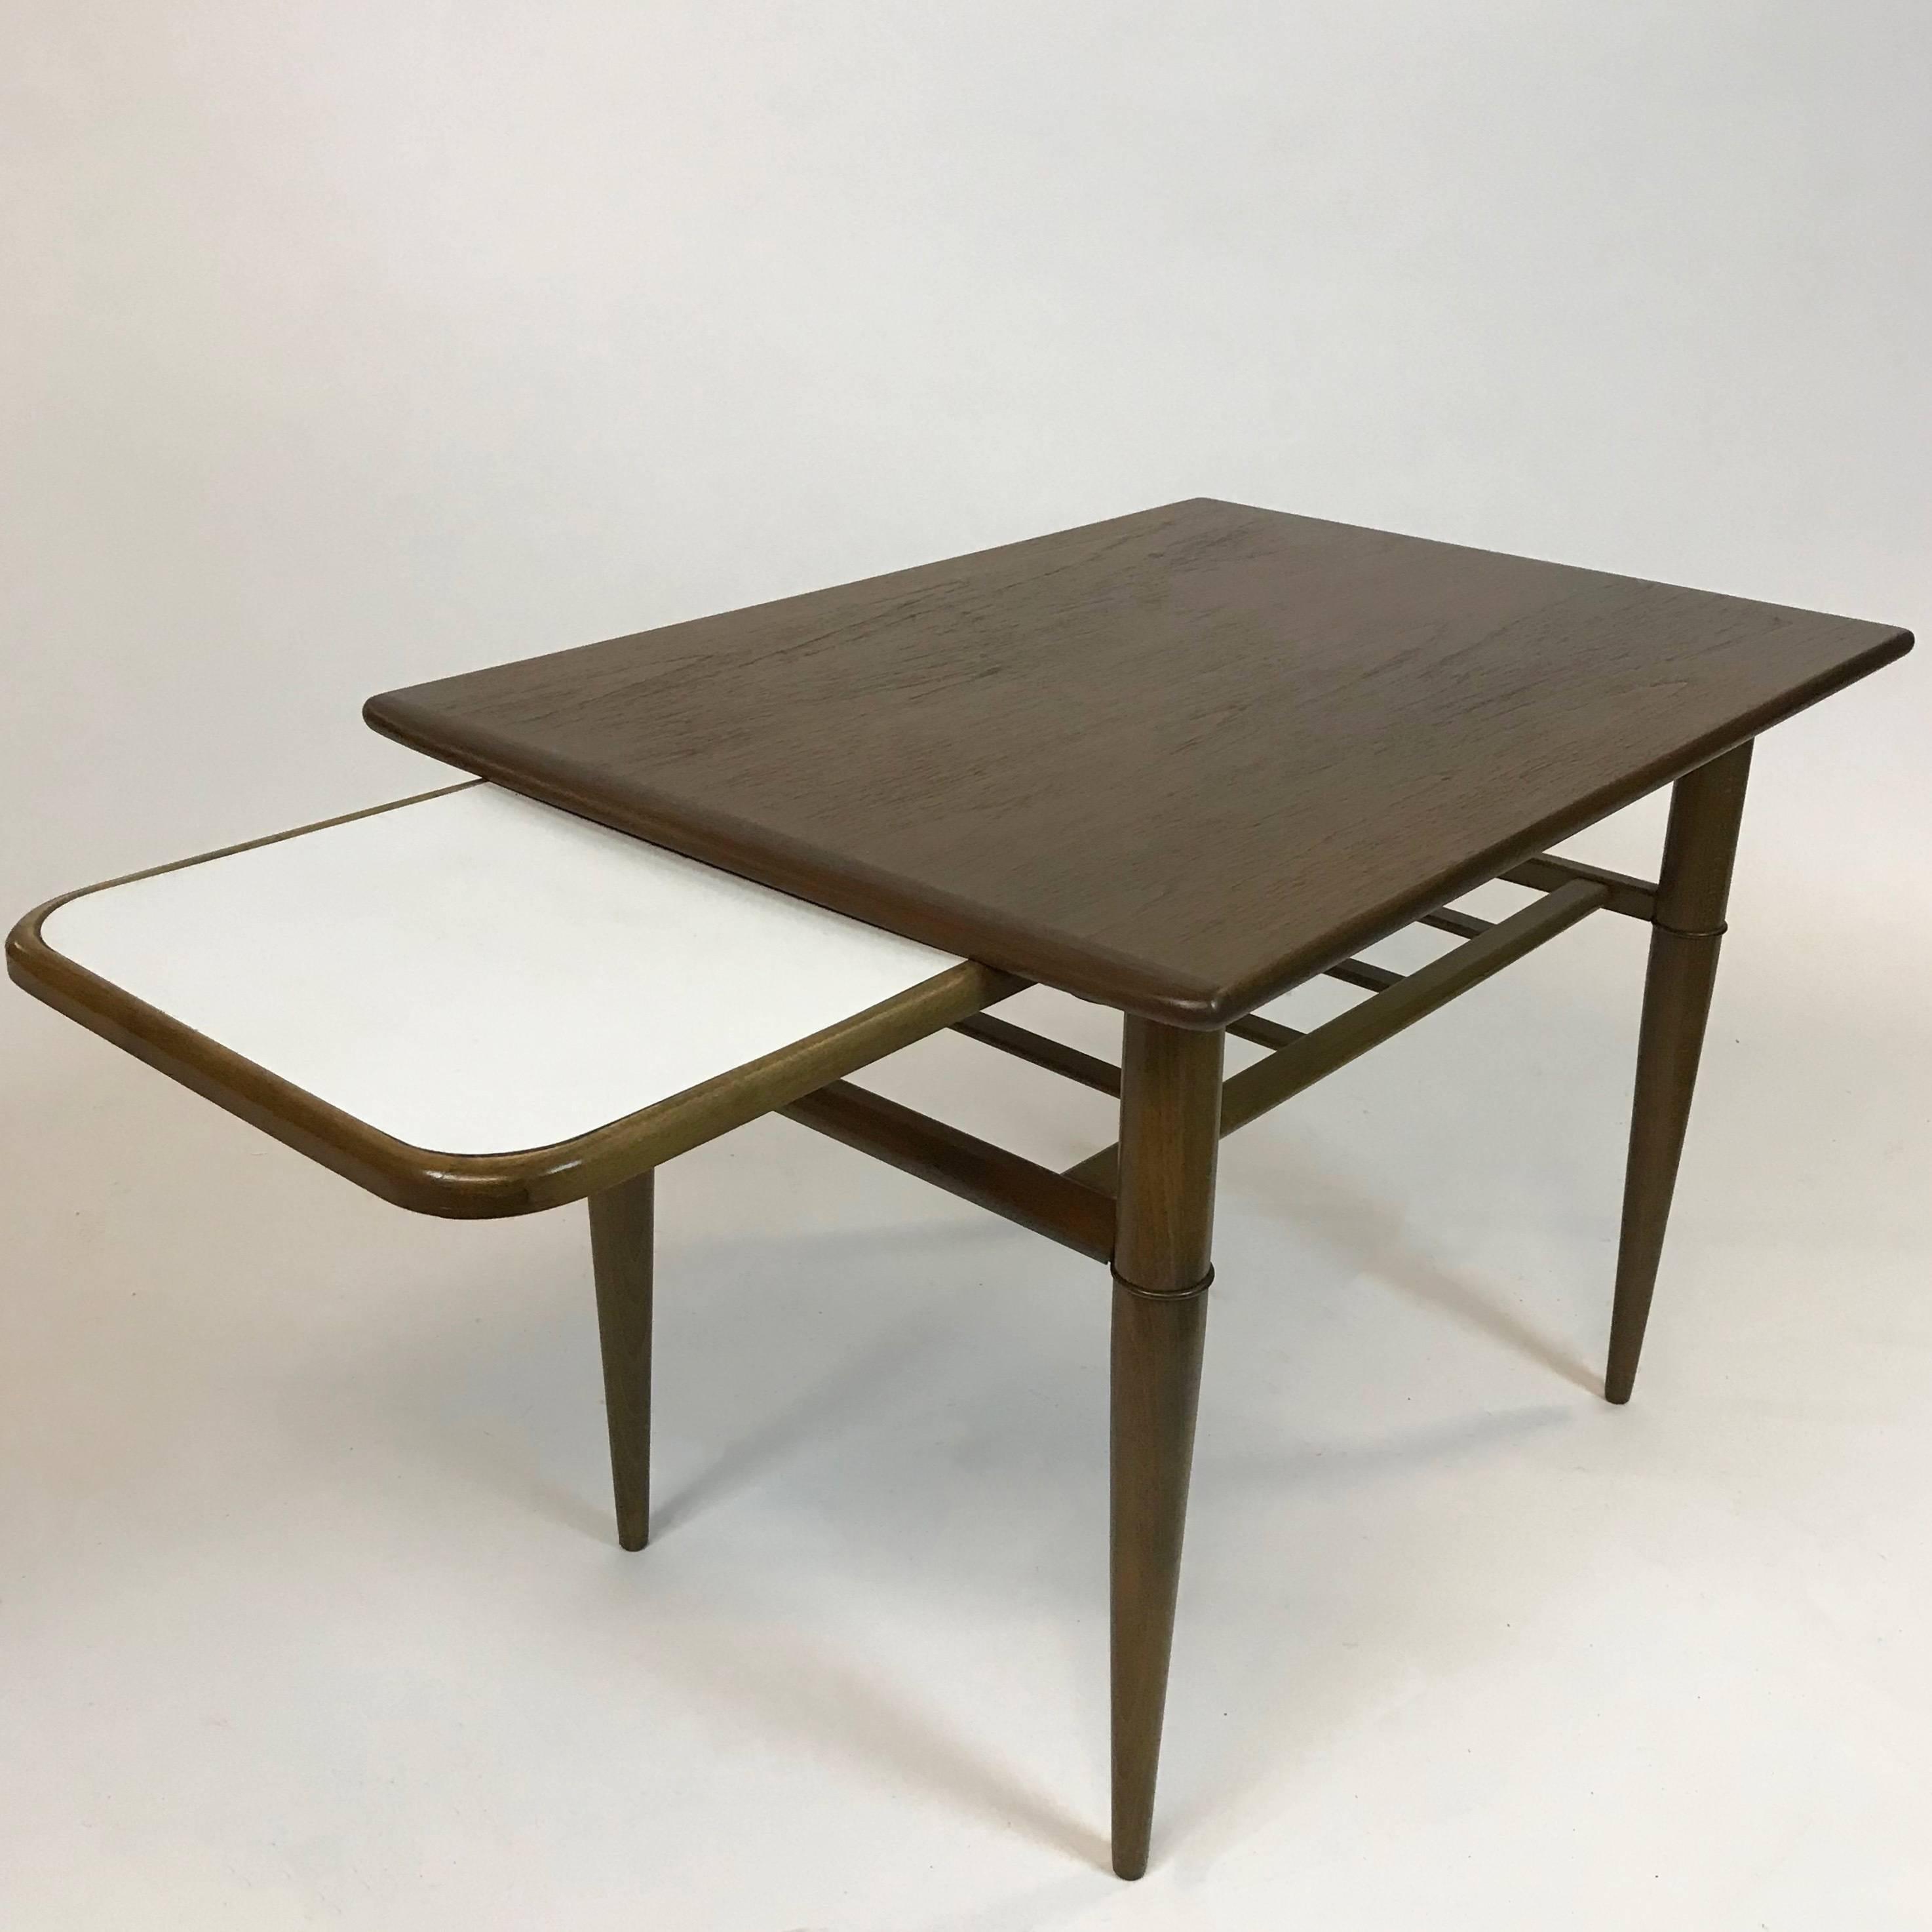 Nicely detailed, Mid-Century Modern, walnut, side table features a lower latticed tier and laminated pull-out shelf that measures 9.5 inches deep x 12.75 inches wide.